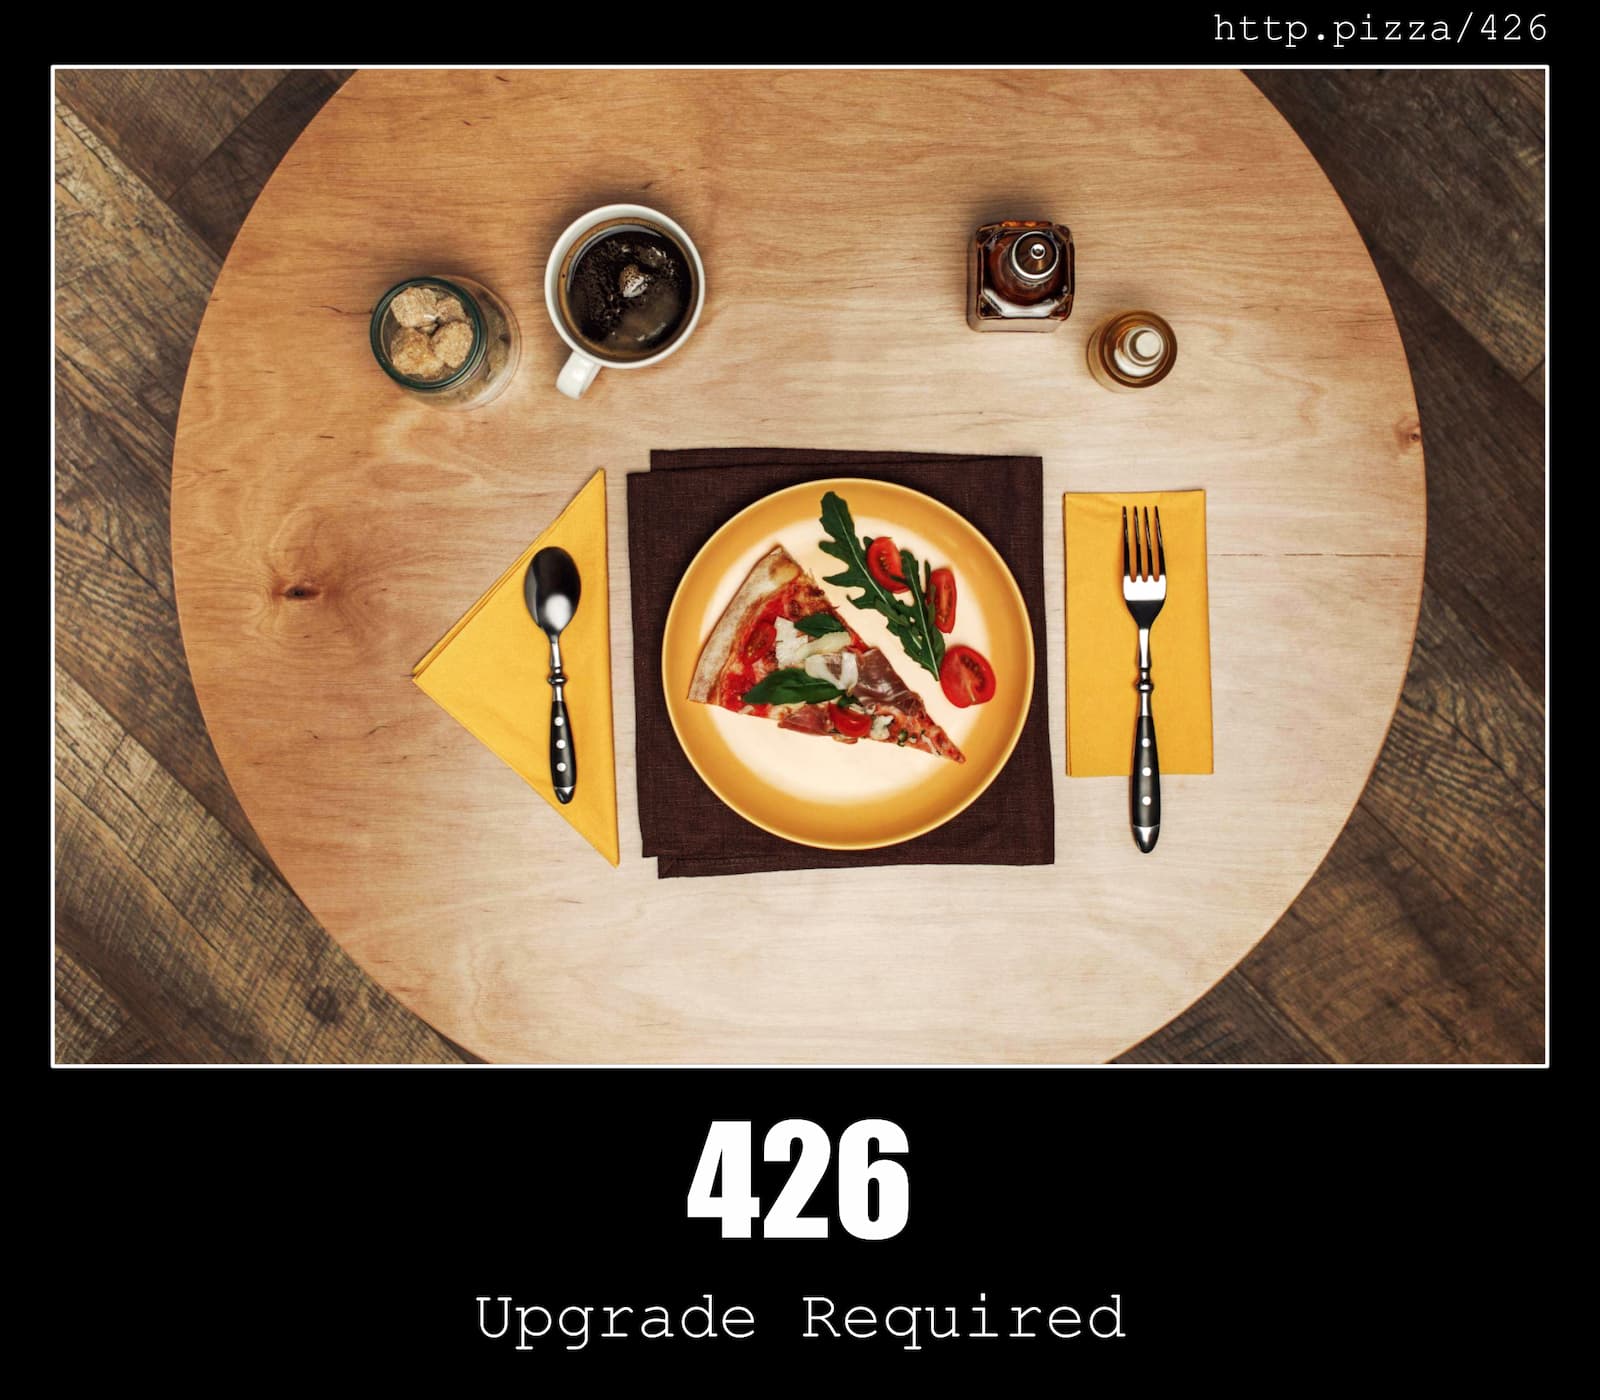 HTTP Status Code 426 Upgrade Required & Pizzas